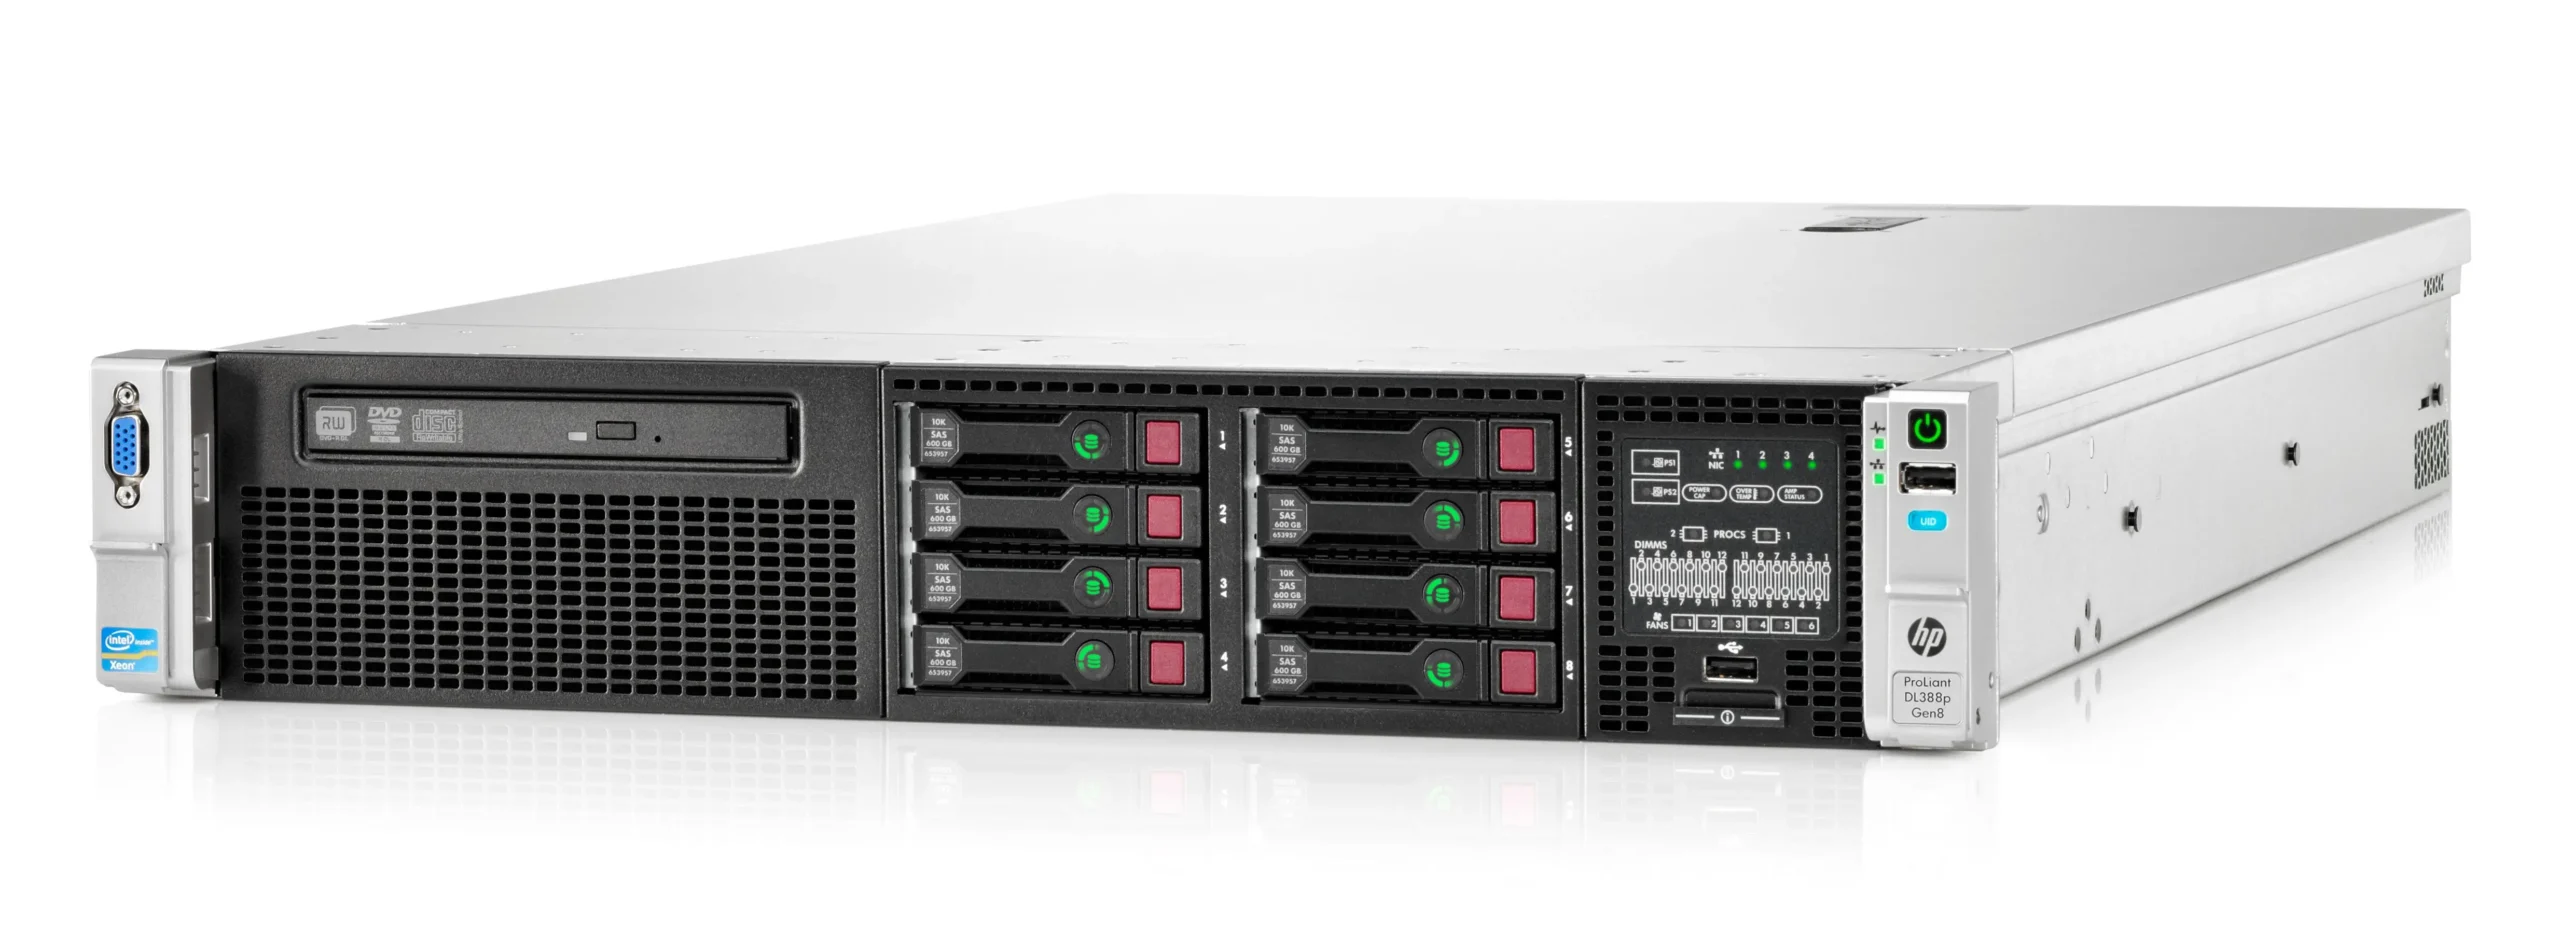 hewlett packard dl380p g8 - What is the price of HP DL380 G8 server